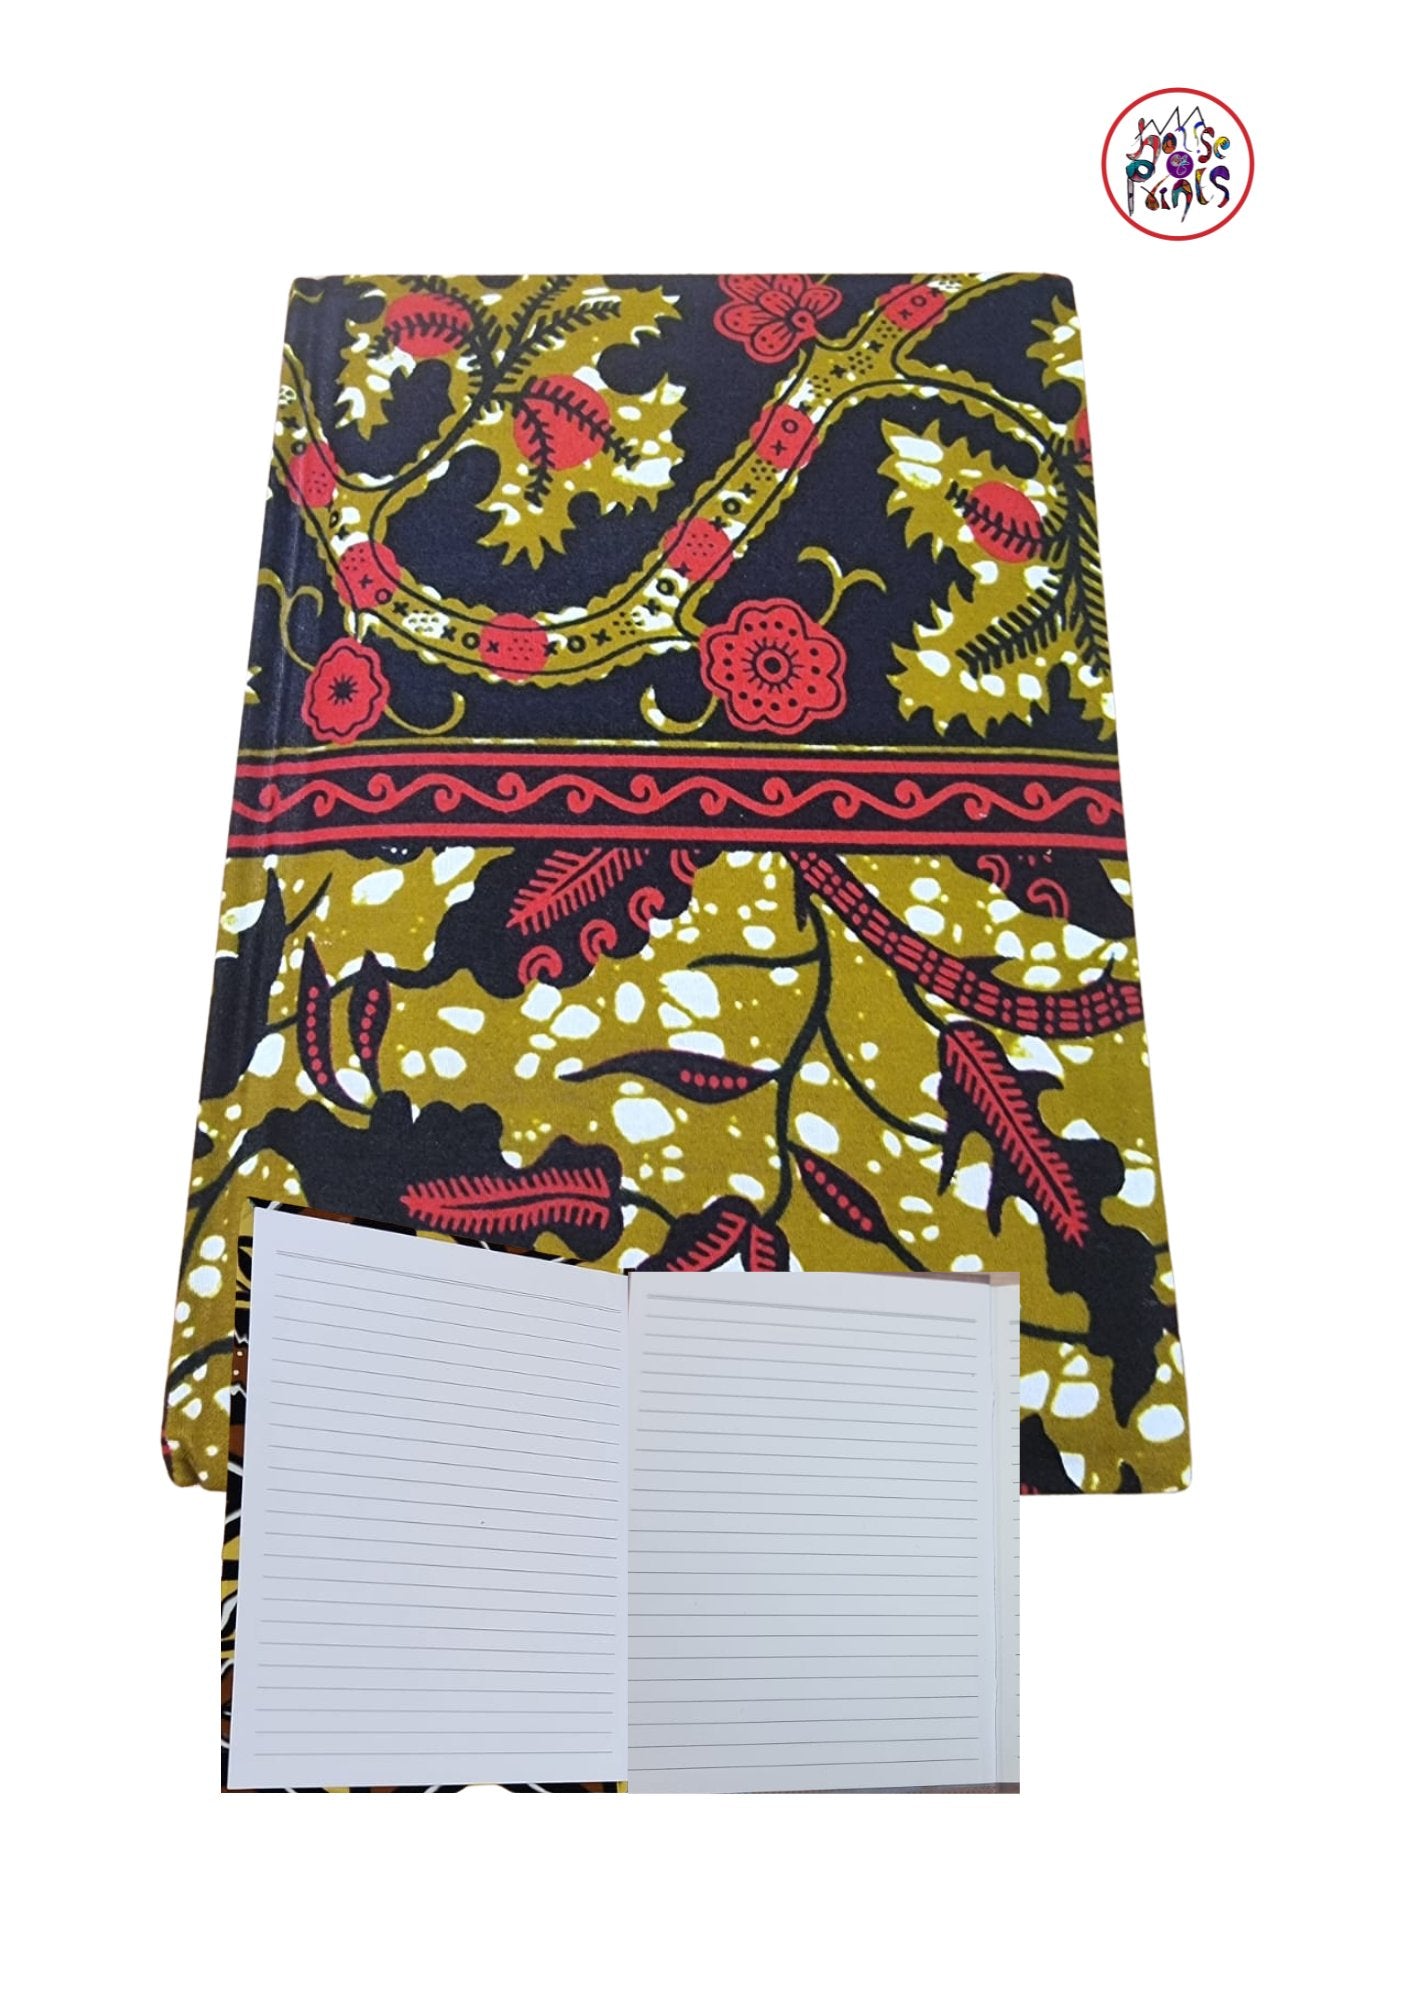 Red & Black Floral Pattern Ankara Fabric Notebook - House of Prints